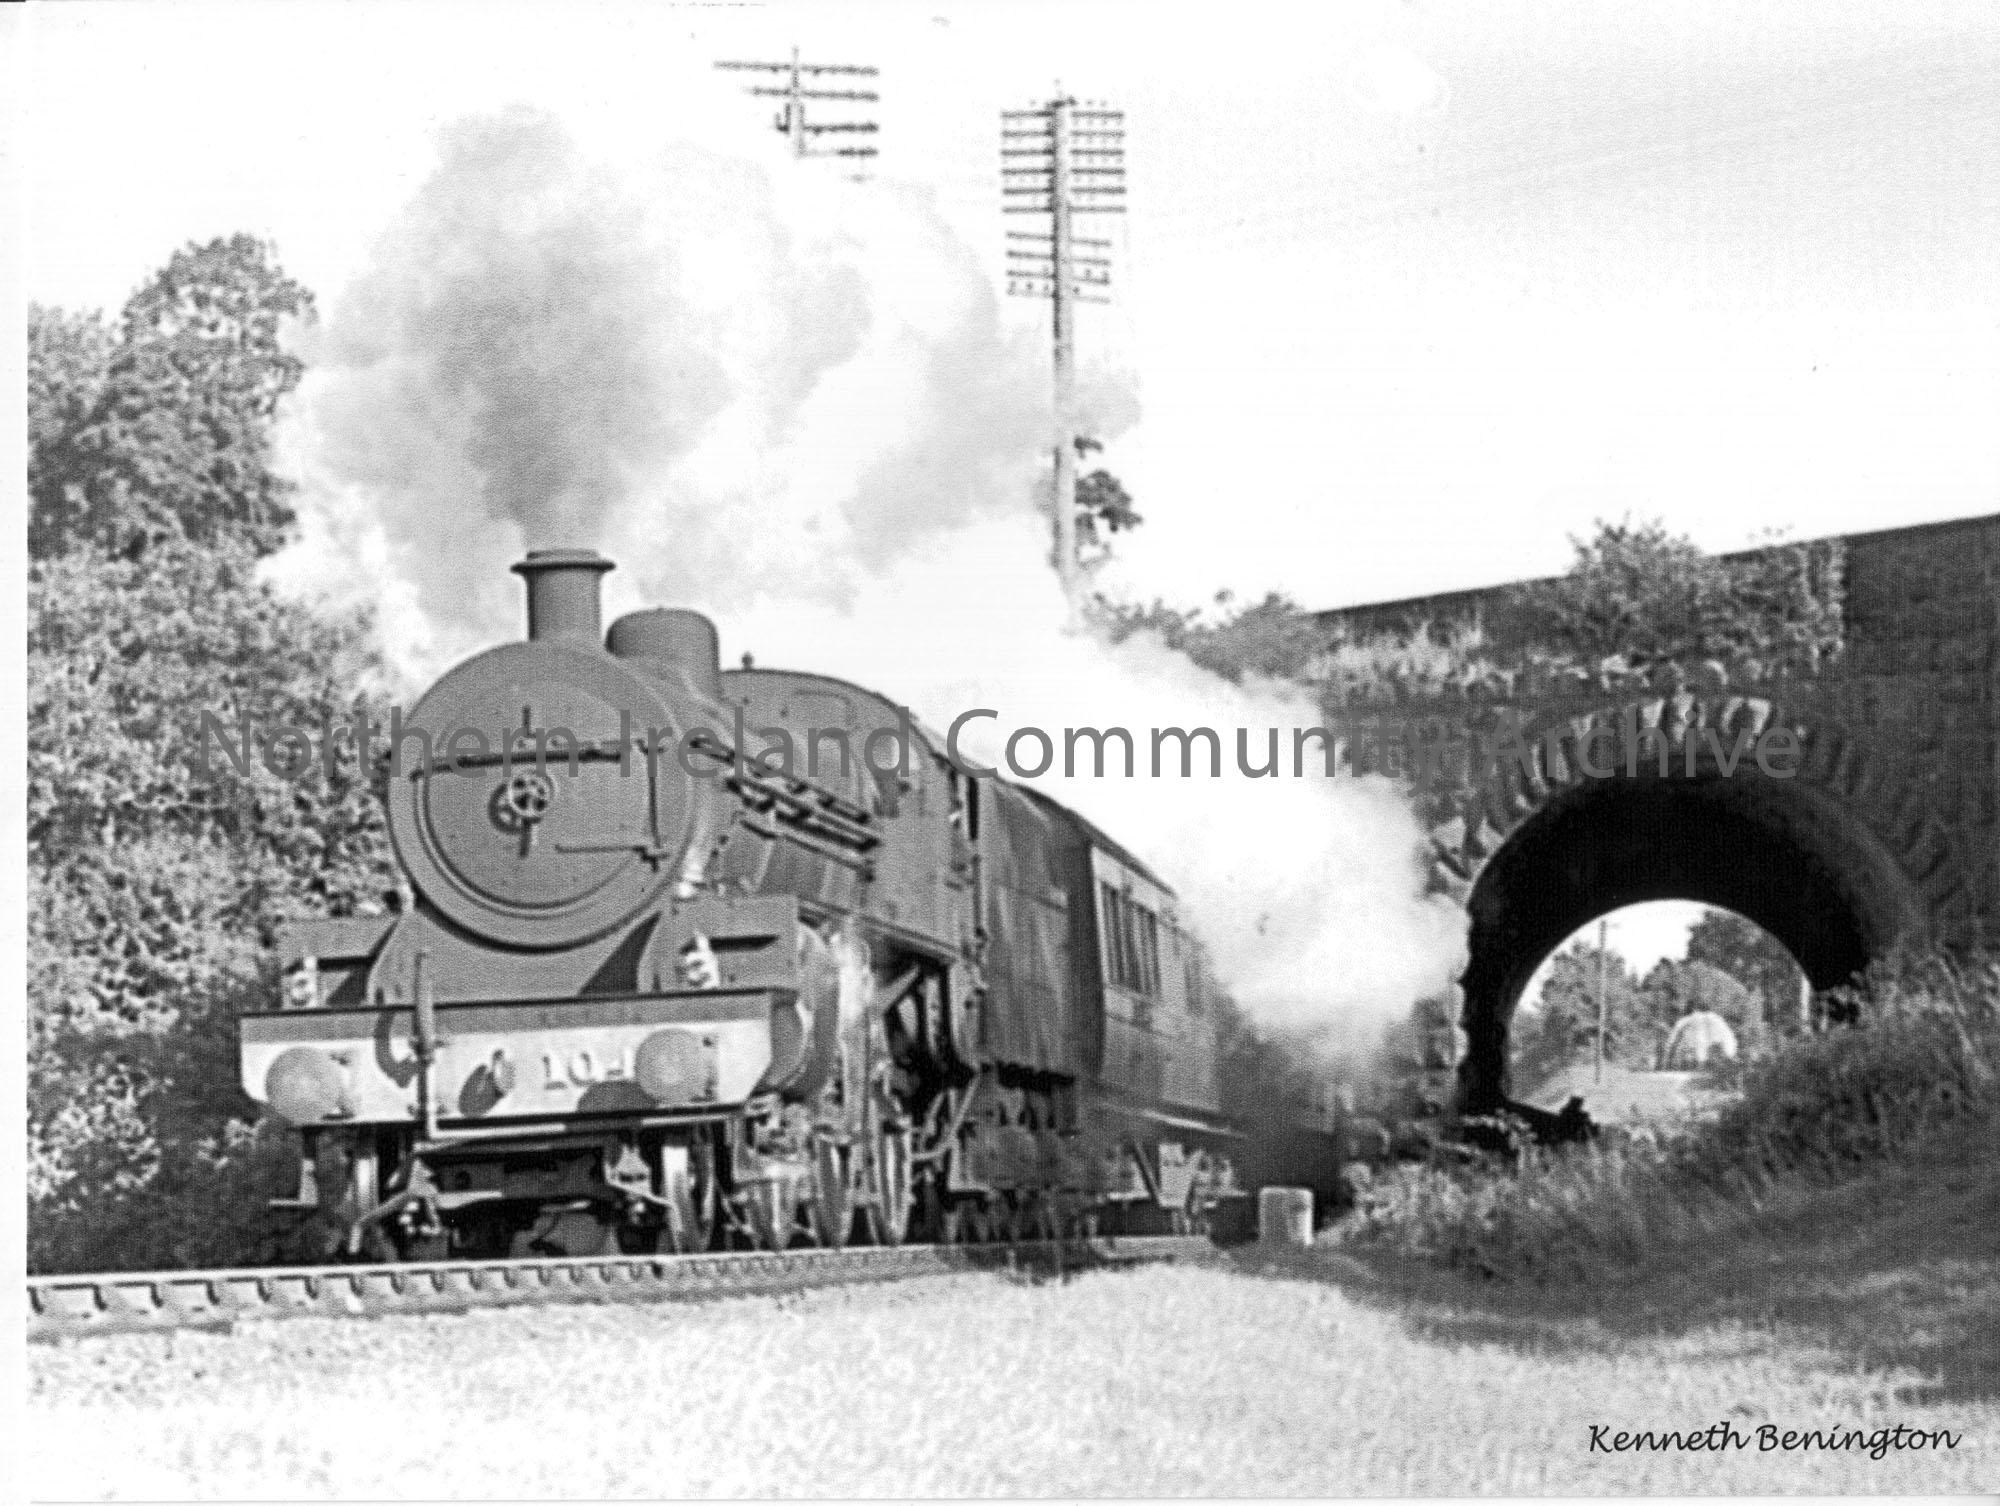 W class 2-6-0 No.104 travels under the main Ballymoney to Ballymena road at the Dry Arch with an early morning Derry to Belfast express